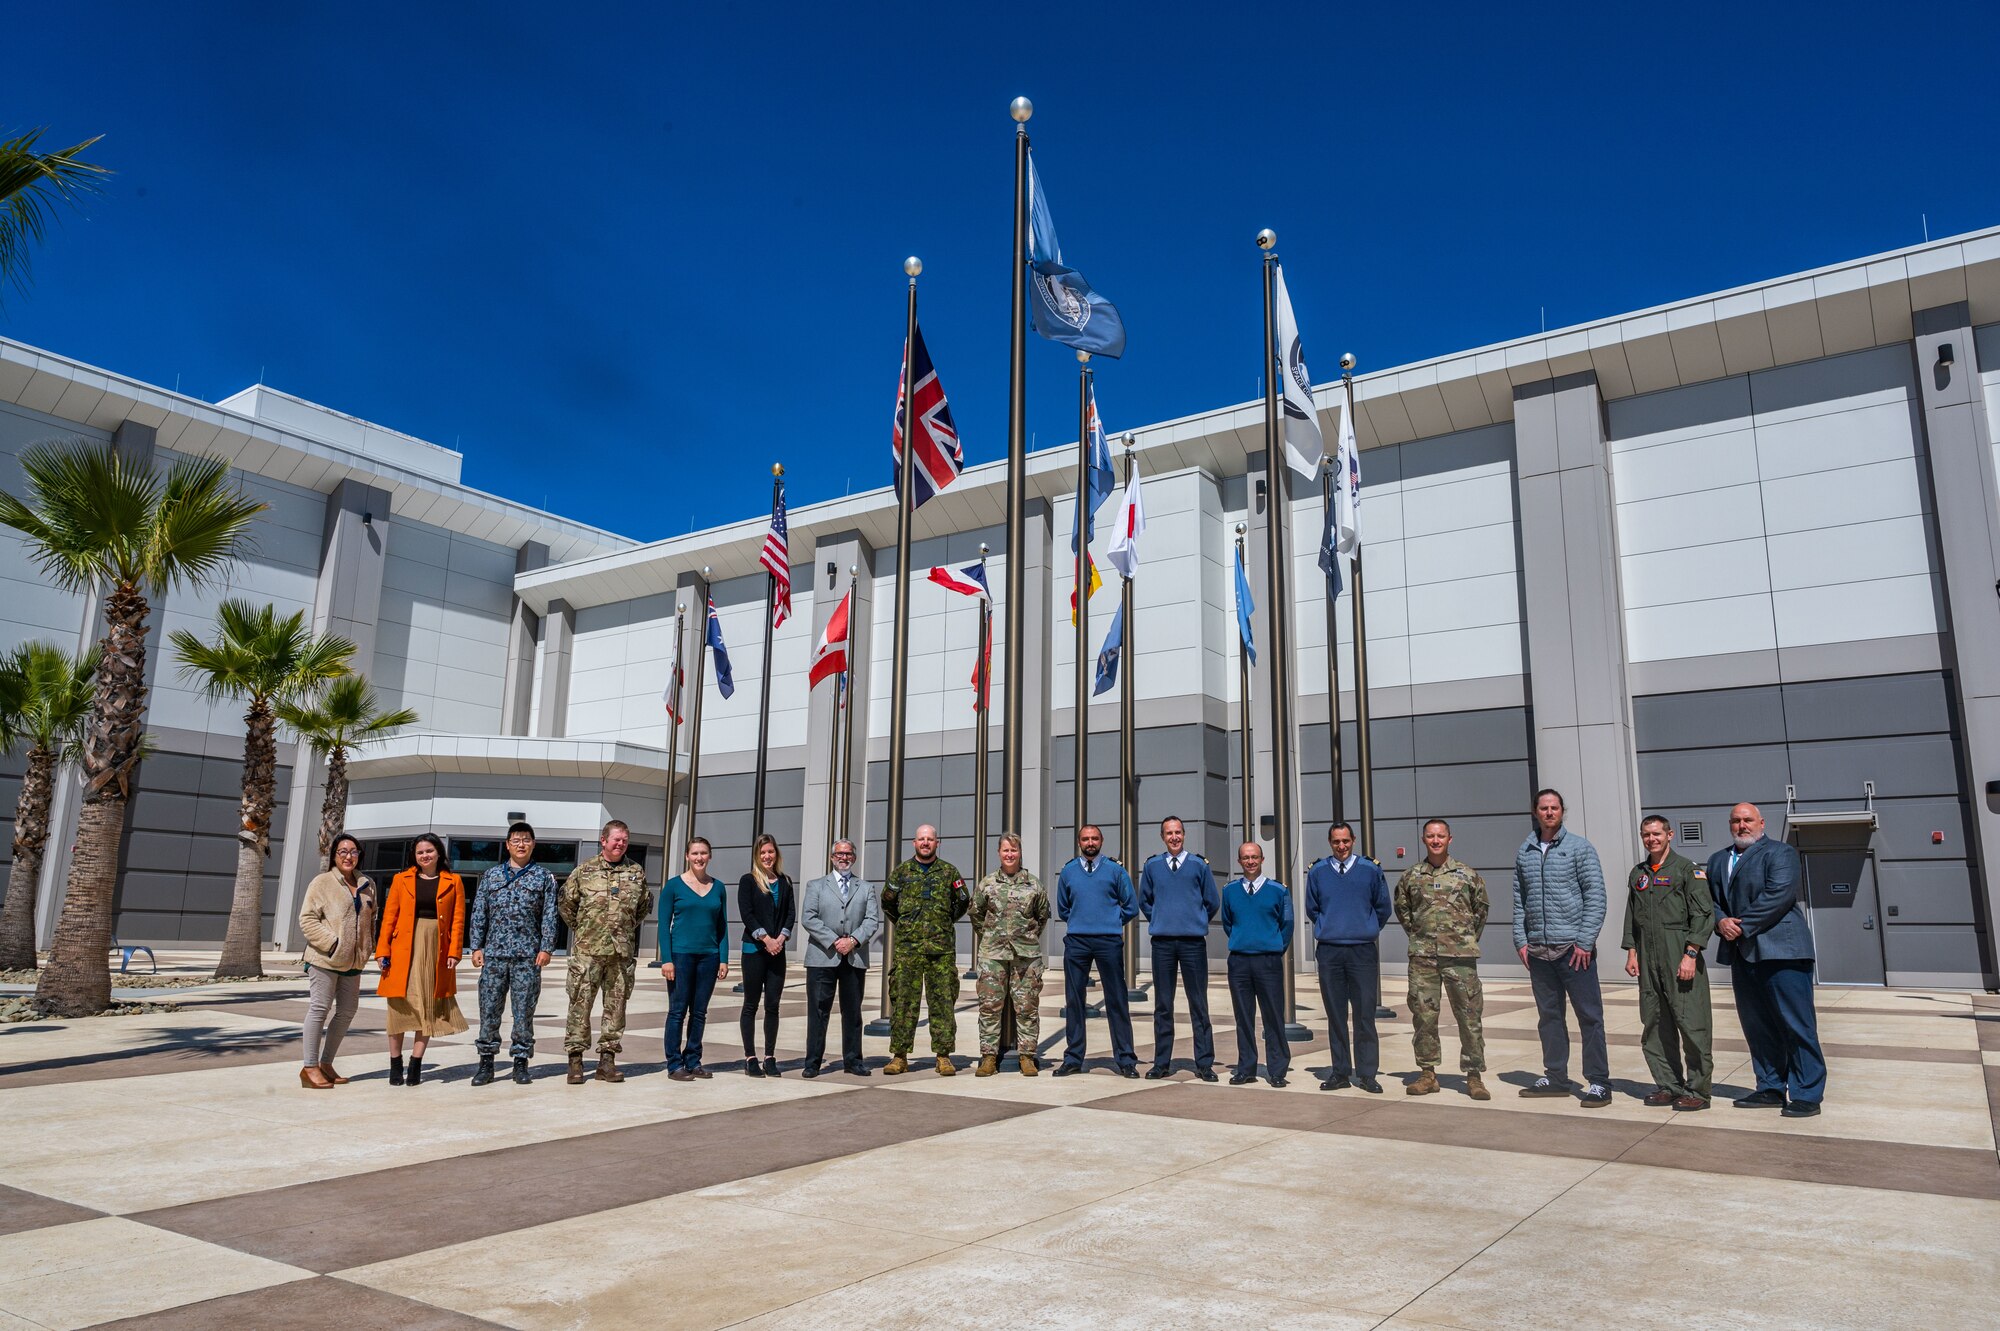 The commander of the Combined Force Space Component Command, Maj. Gen. DeAnna Burt, center, stands for a photo in front of the CFSCC headquarters building with French Space Command officers and French Armed Forces Joint Head Quarters, as well as the U.S. Space Command’s Multinational Space Collaboration office team, Apr. 15, 2022, at Vandenberg Space Force Base, Calif. The French officers pictured with Burt are Lt. Col. Yann Roberge, Col. Guillaume Bourdeloux, Col. Laurent Rigal, and Col. Sebastien Alvarez. The delegation of French officers spent a week with USSPACECOM, CFSCC, the Combined Space Operations Center, and the 18th Space Defense Squadron to become more familiar with Operation OLYMPIC DEFENDER mission areas, and to discuss potential future operational support and partnership opportunities in the space domain. The French Space Command stood up in September 2019 and is in charge of operations support, space service support and space defense. (U.S. Space Force photo by Tech. Sgt Luke Kitterman)